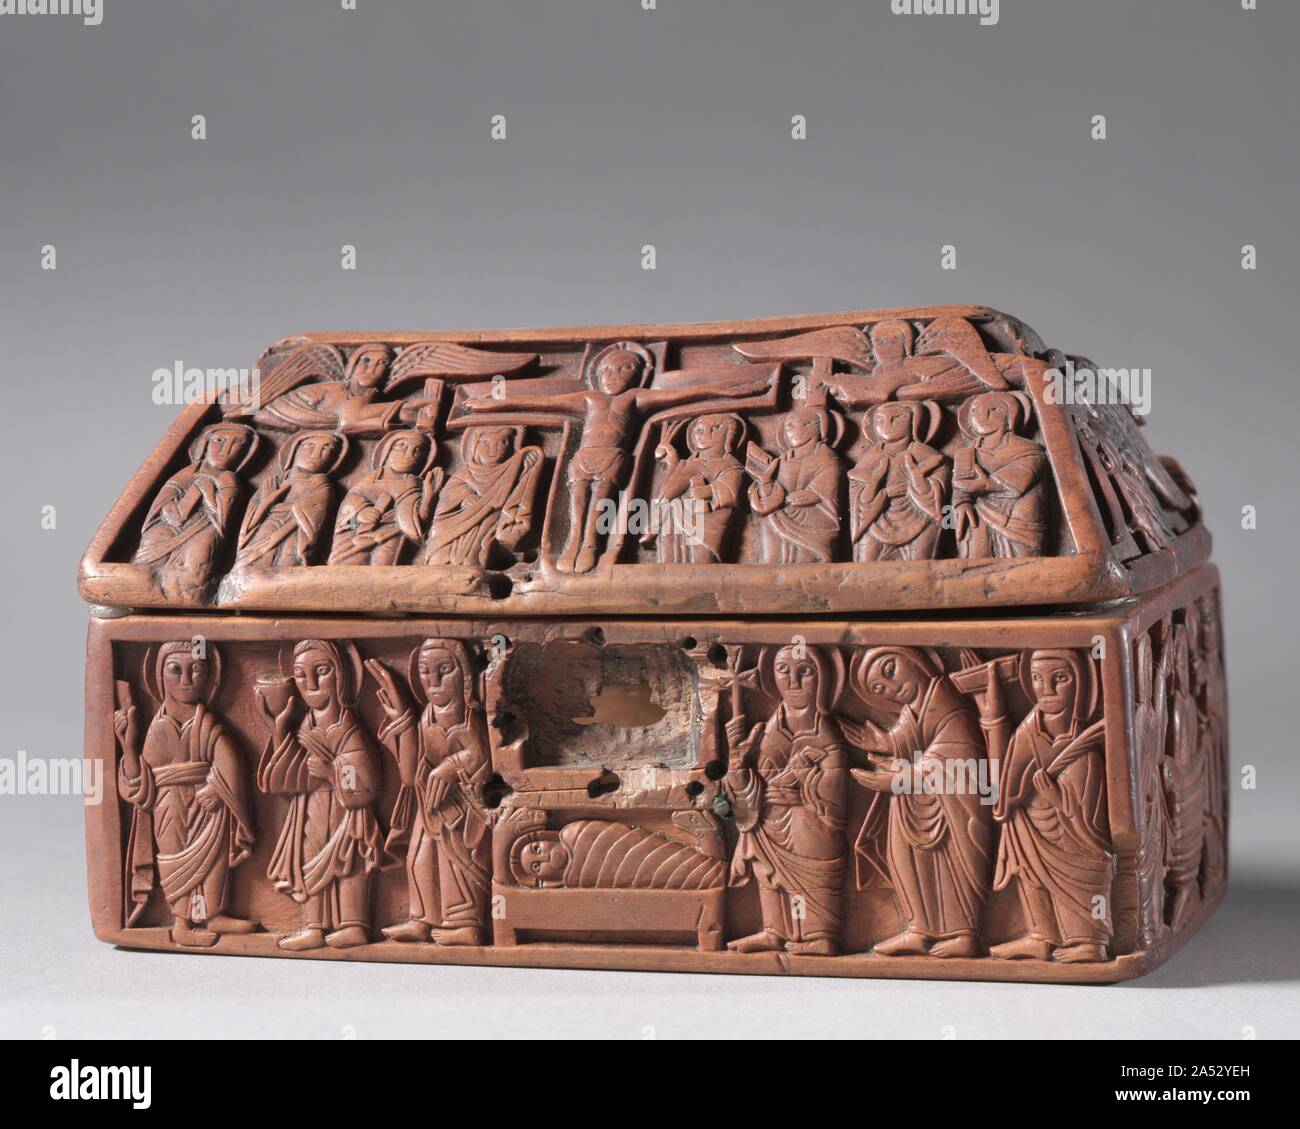 Wooden Casket: Scenes from the Life of Christ, c. 1050. This casket is a rare, if not unique example of high-quality woodcarving from Anglo-Saxon England. Decorated with scenes from Christ&#x2019;s life, it was likely made for an ecclesiastical purpose and may have housed relics. On one long side, the Christ child rests in the manger. Above, the Crucifixion is shown with mourners gathered below the cross and two angels flanking it on either side. On the other long side is the Ascension, God&#x2019;s hand pulling Christ heavenward. Christ in Majesty appears above. The short sides show Christ&#x Stock Photo